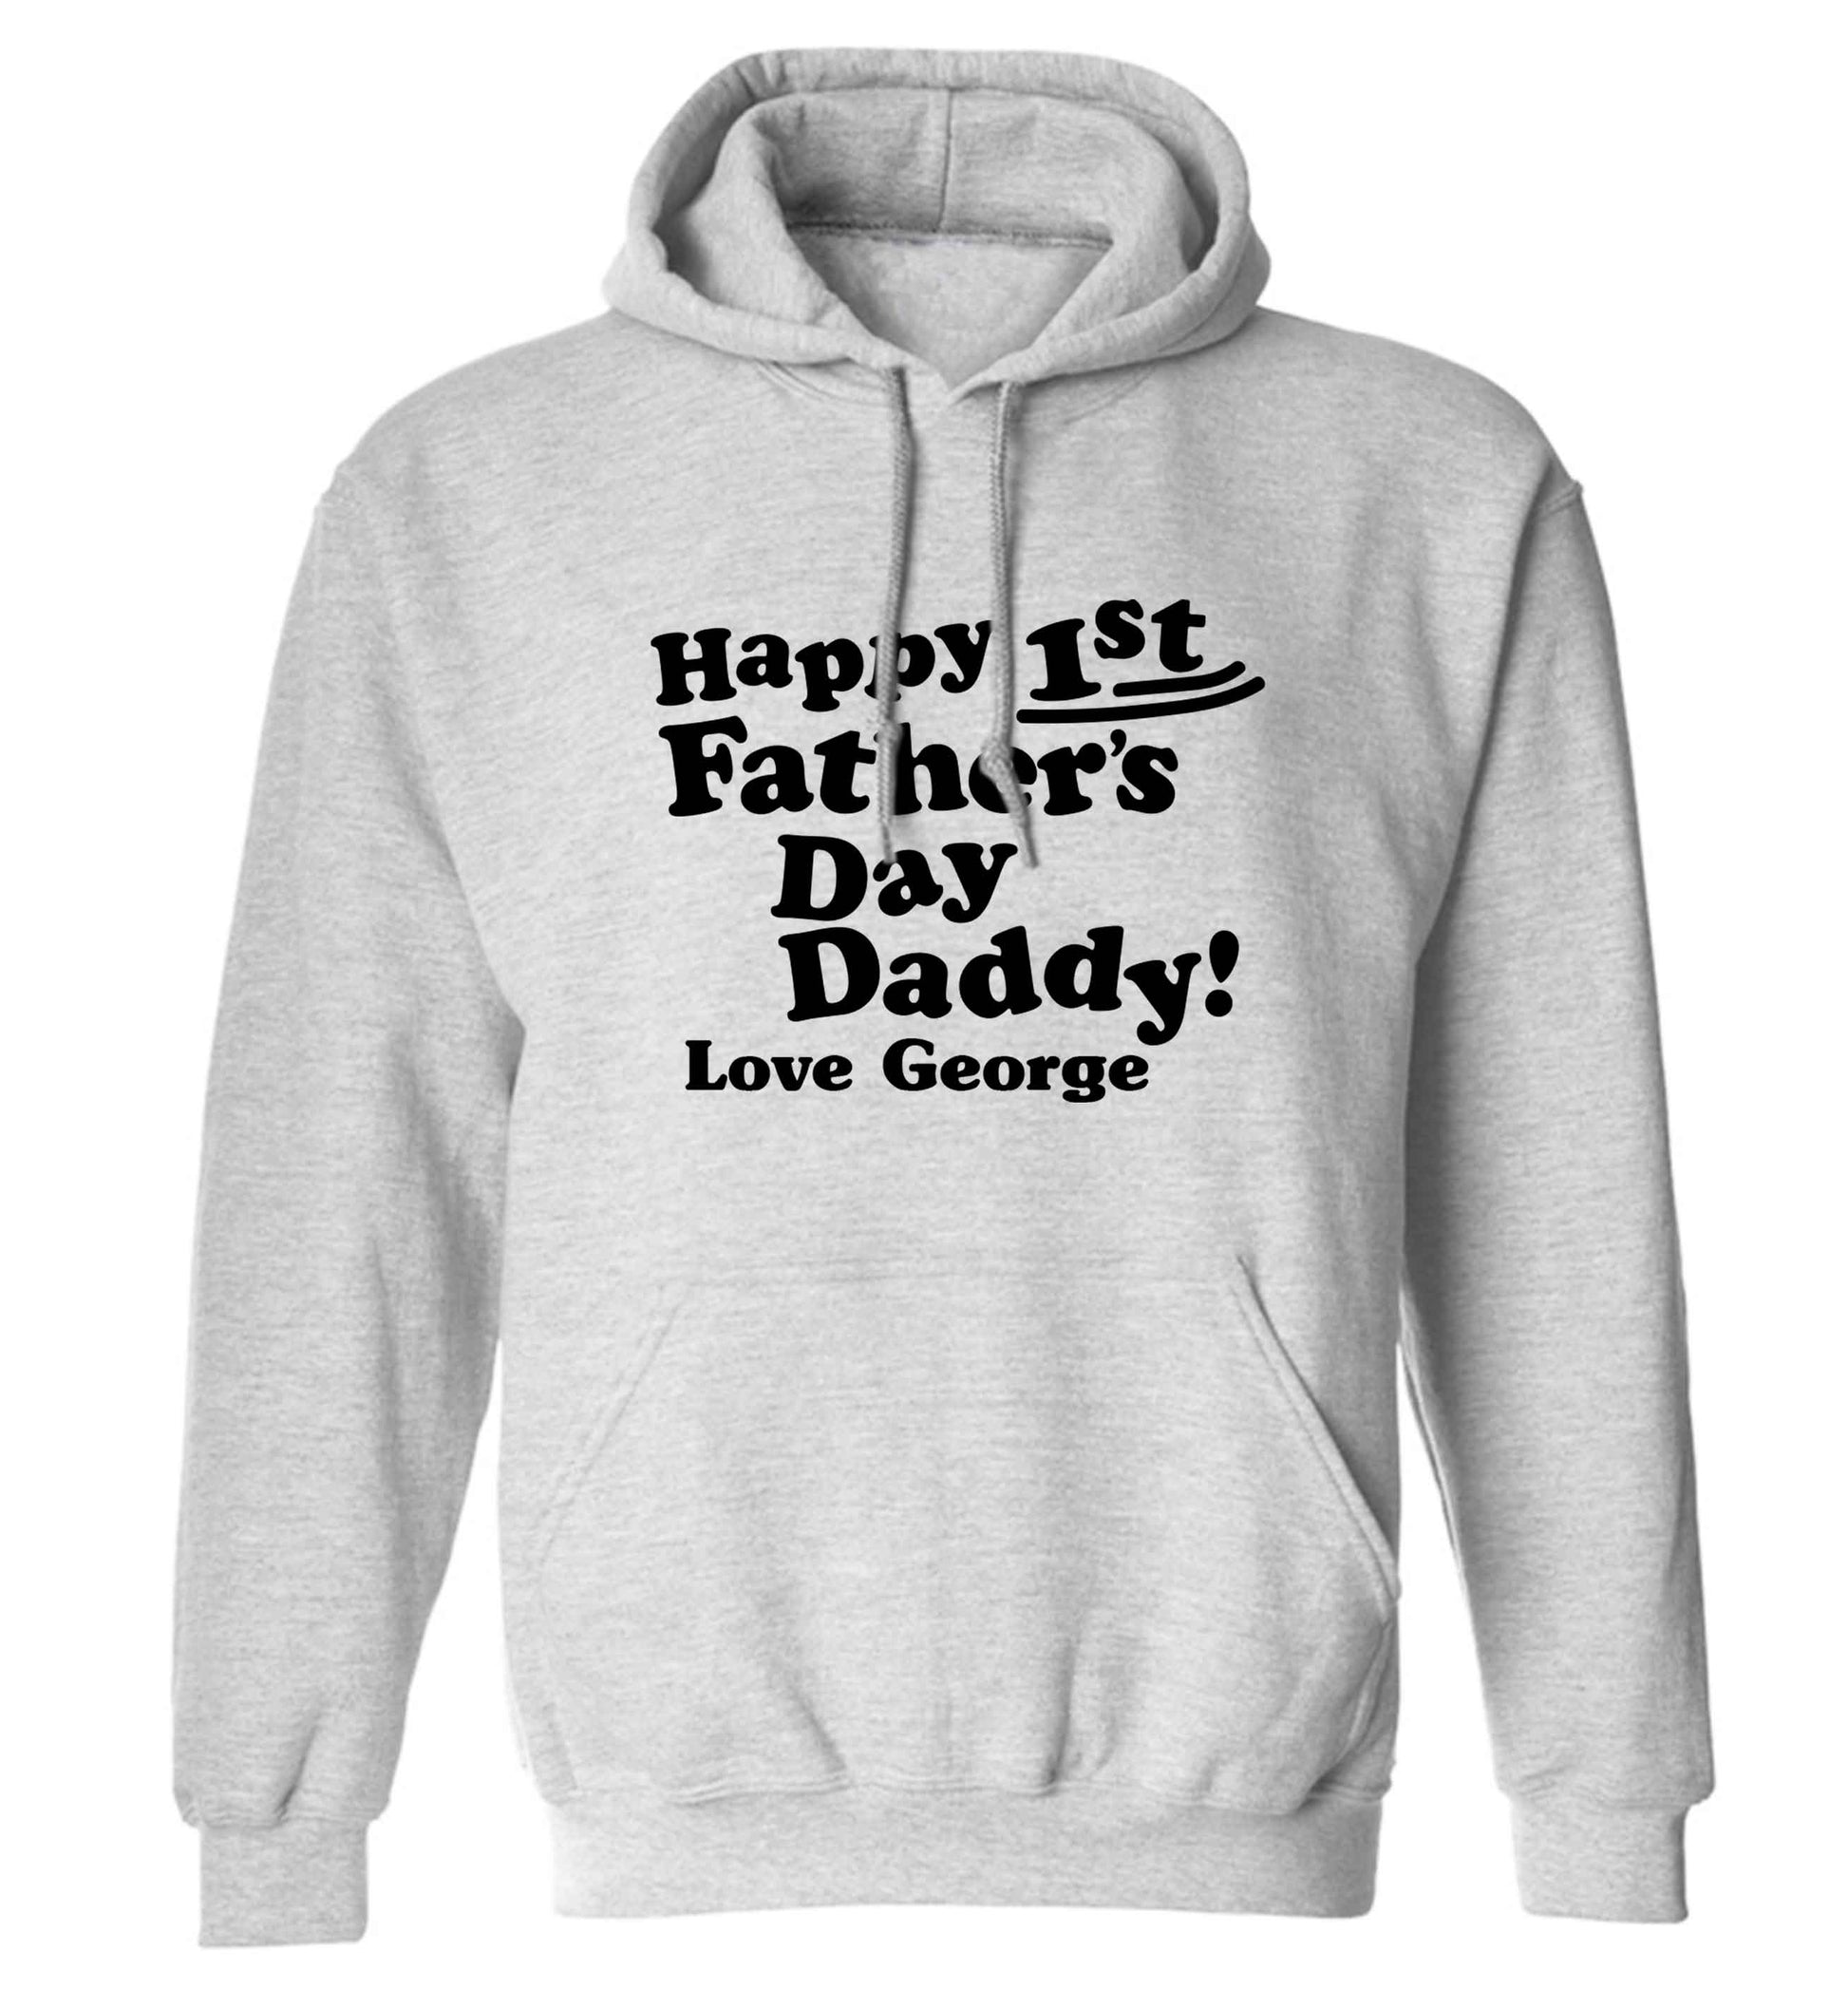 Happy first Fathers Day daddy love personalised adults unisex grey hoodie 2XL